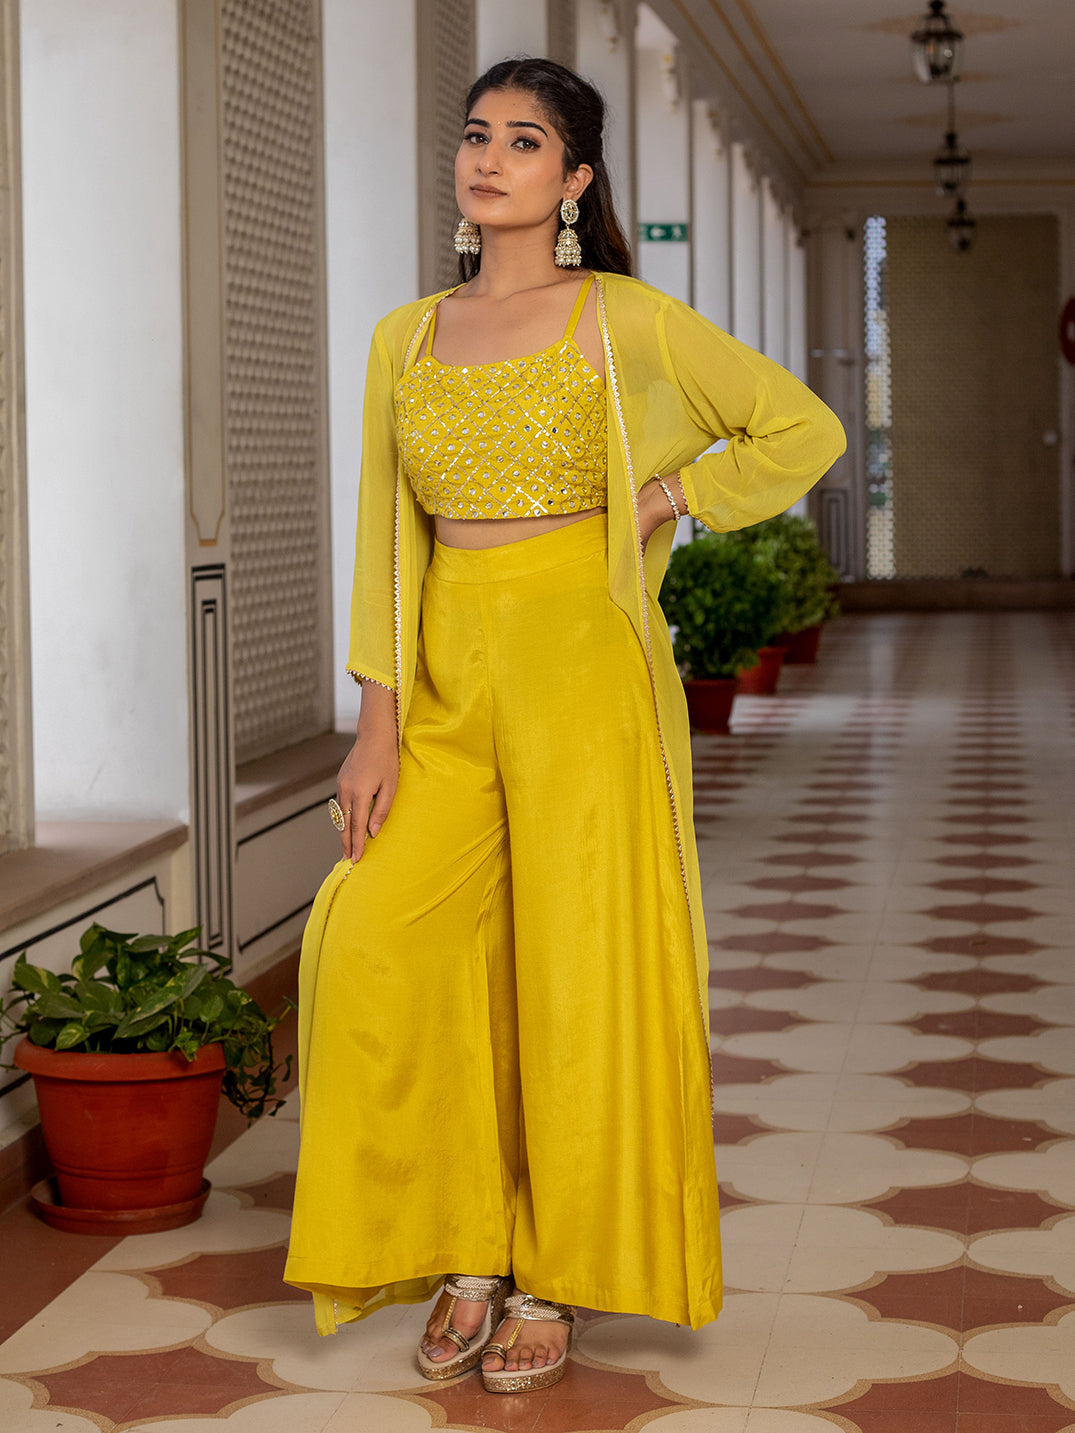 dazzle-in-our-mustard-yellow-co-ord-set-adorned-with-captivating-mirror-work-a-vibrant-ensemble-thats-a-perfect-blend-of-tradition-and-trend